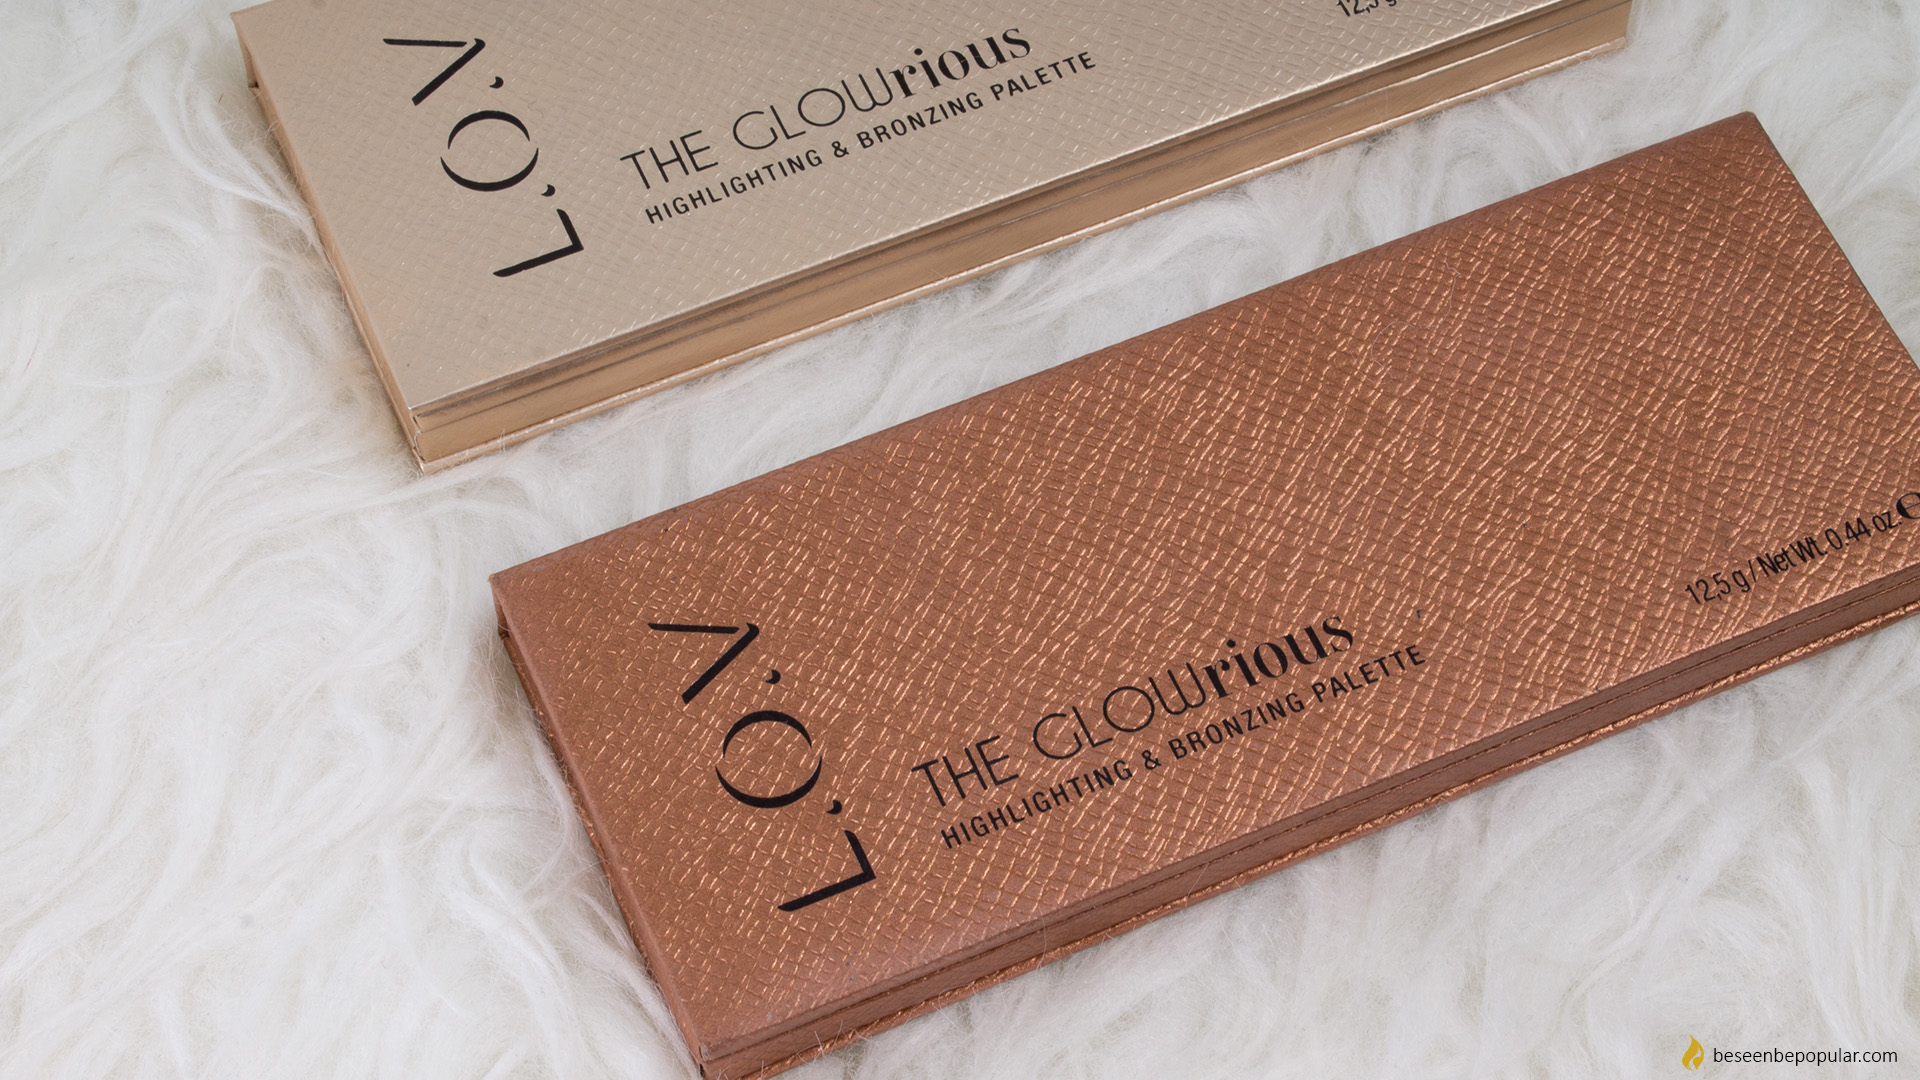 L.O.V. The GLOWrious highlighting and bronzing palette